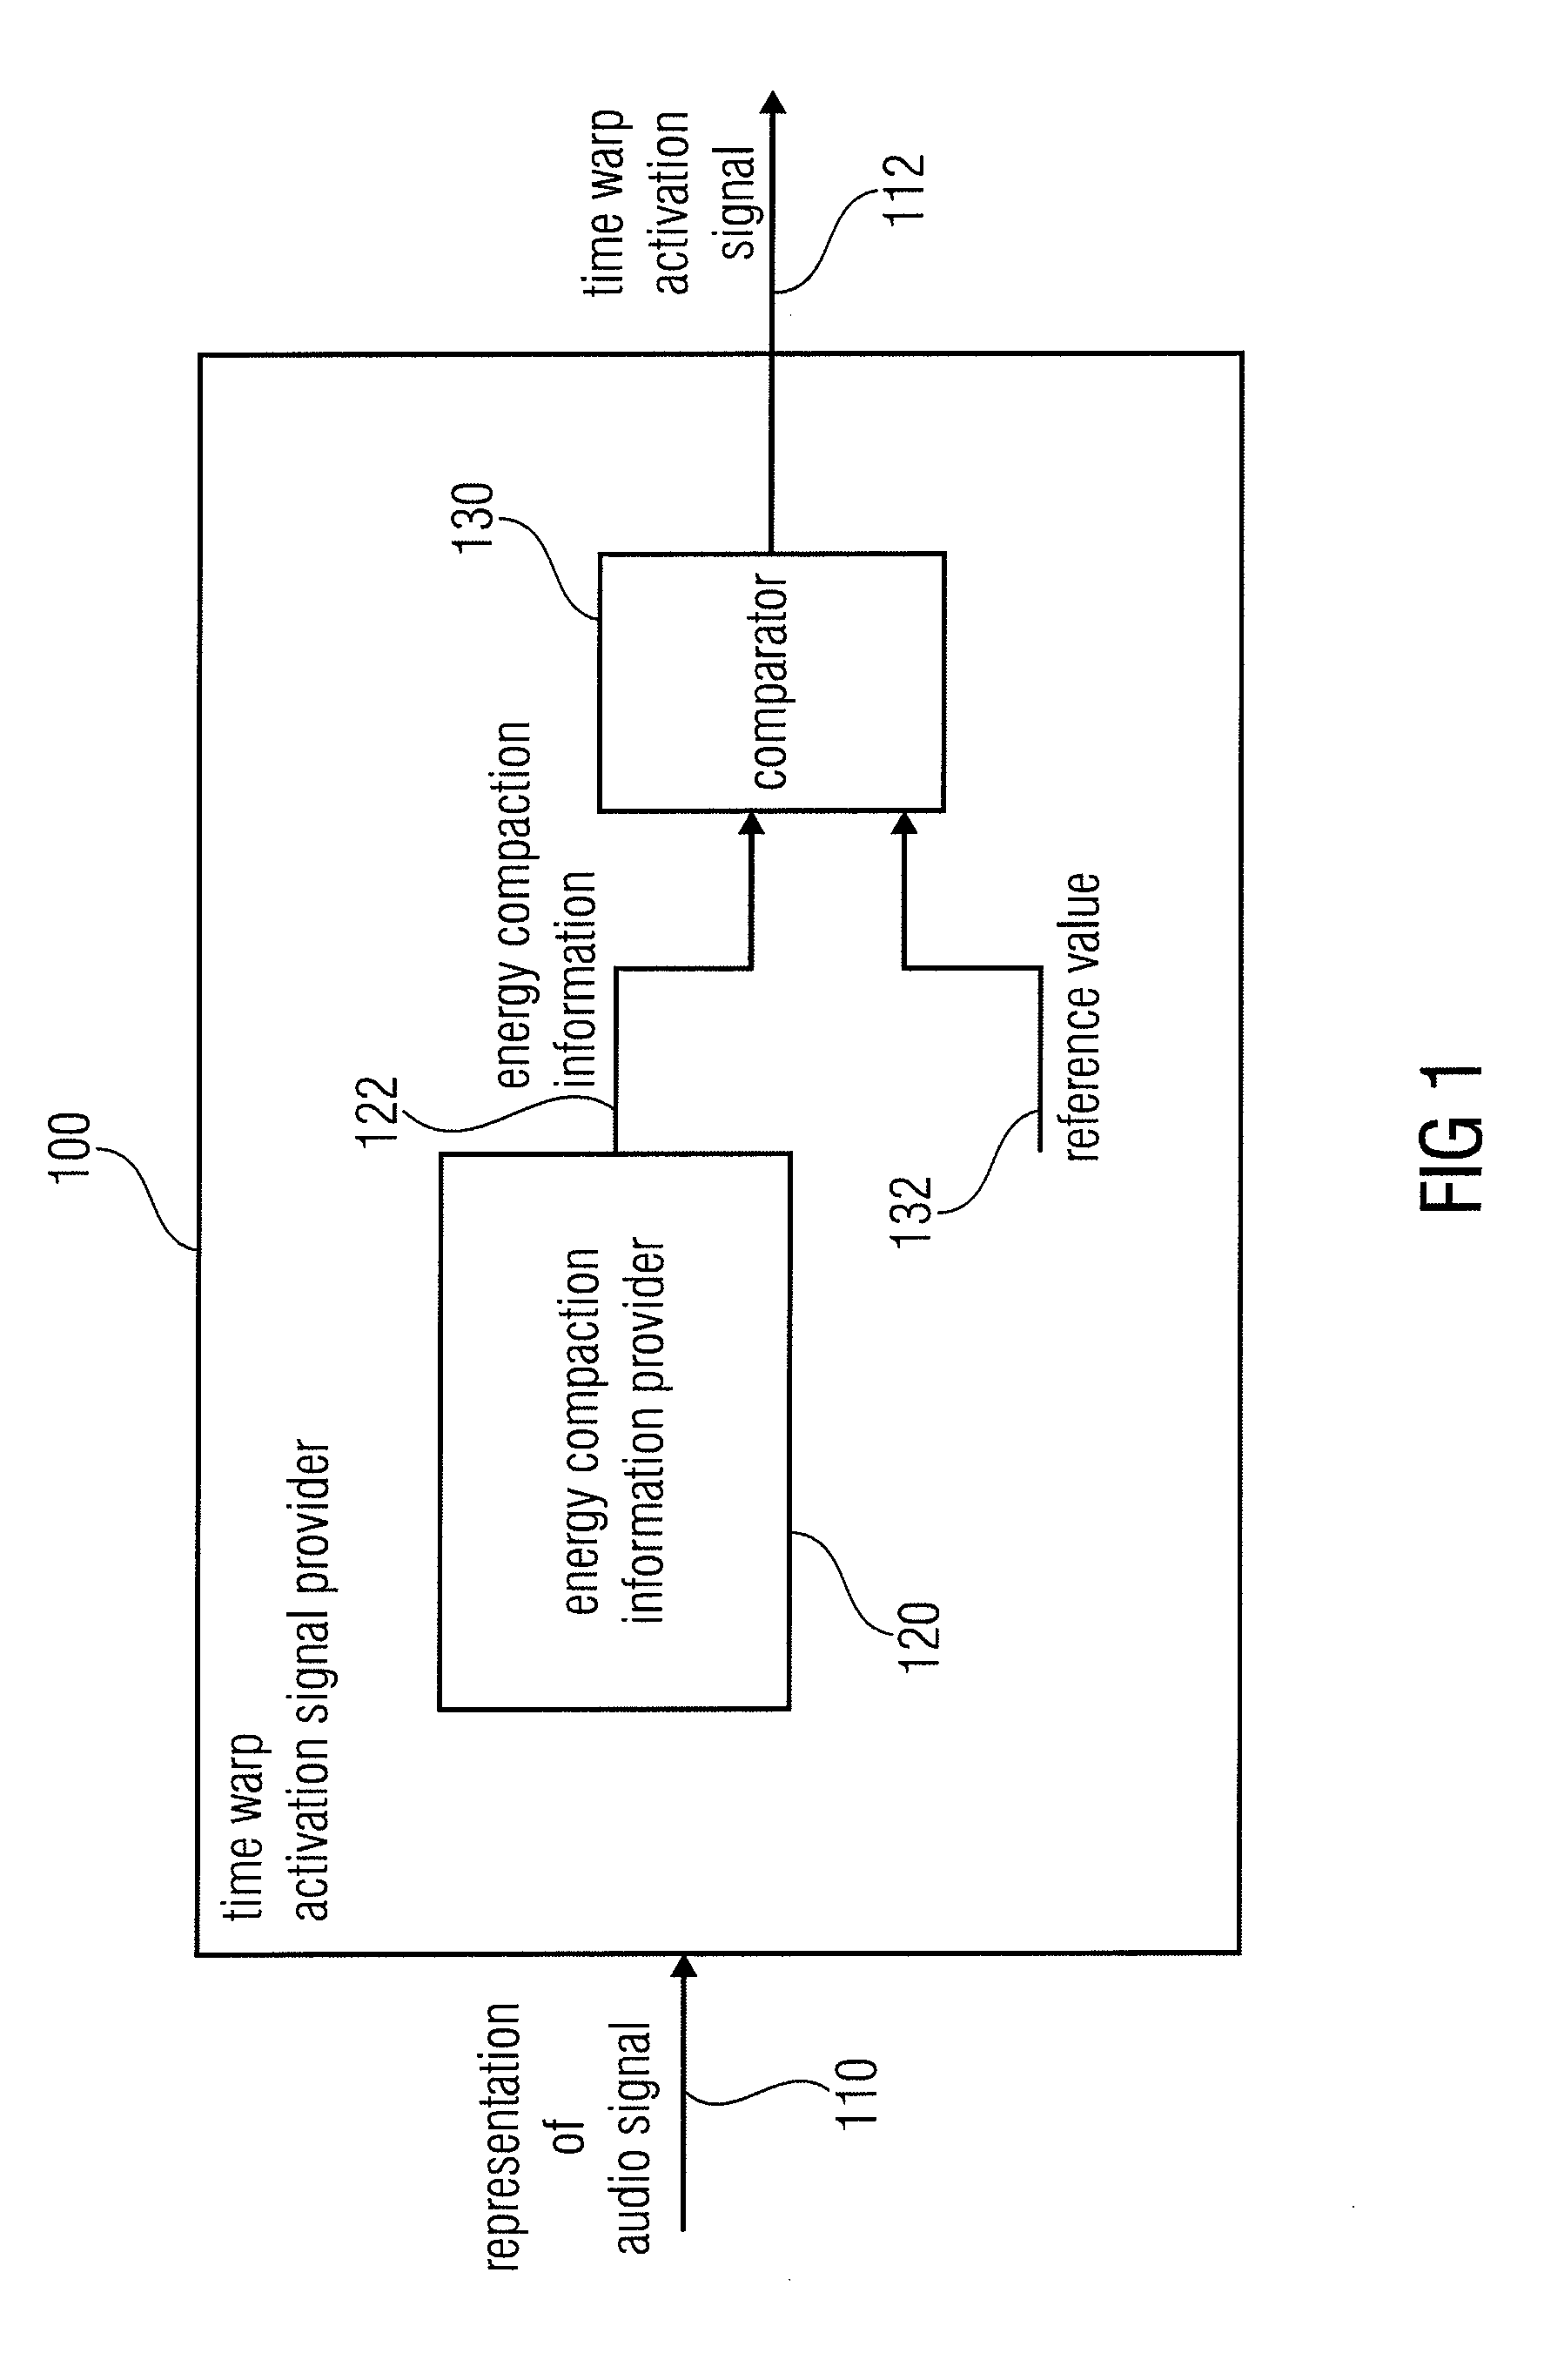 Time warp activation signal provider, audio signal encoder, method for providing a time warp activation signal, method for encoding an audio signal and computer programs